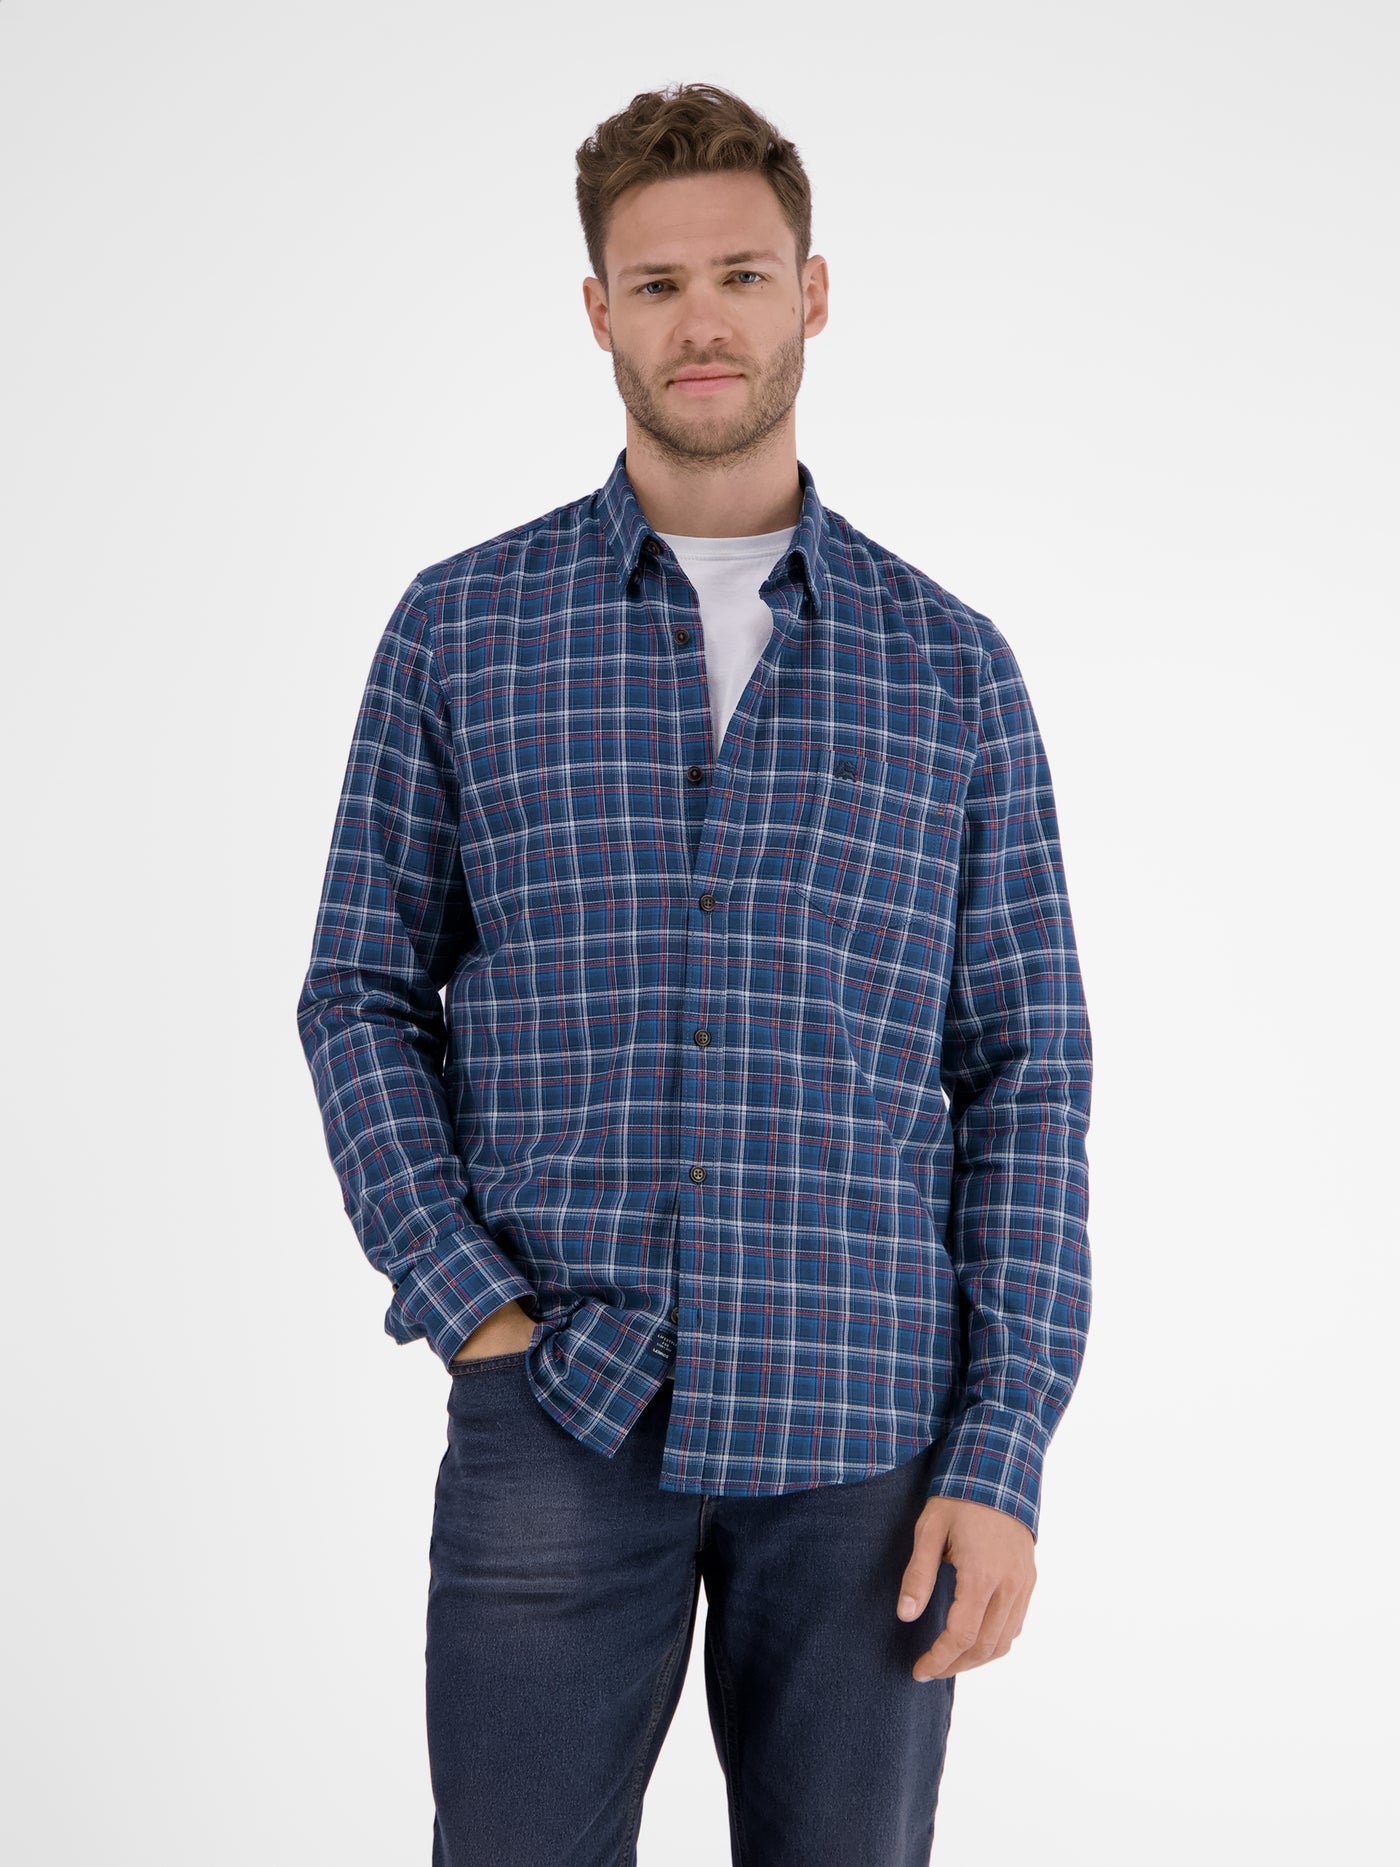 Long sleeve shirt. checkered. concealed button-down collar